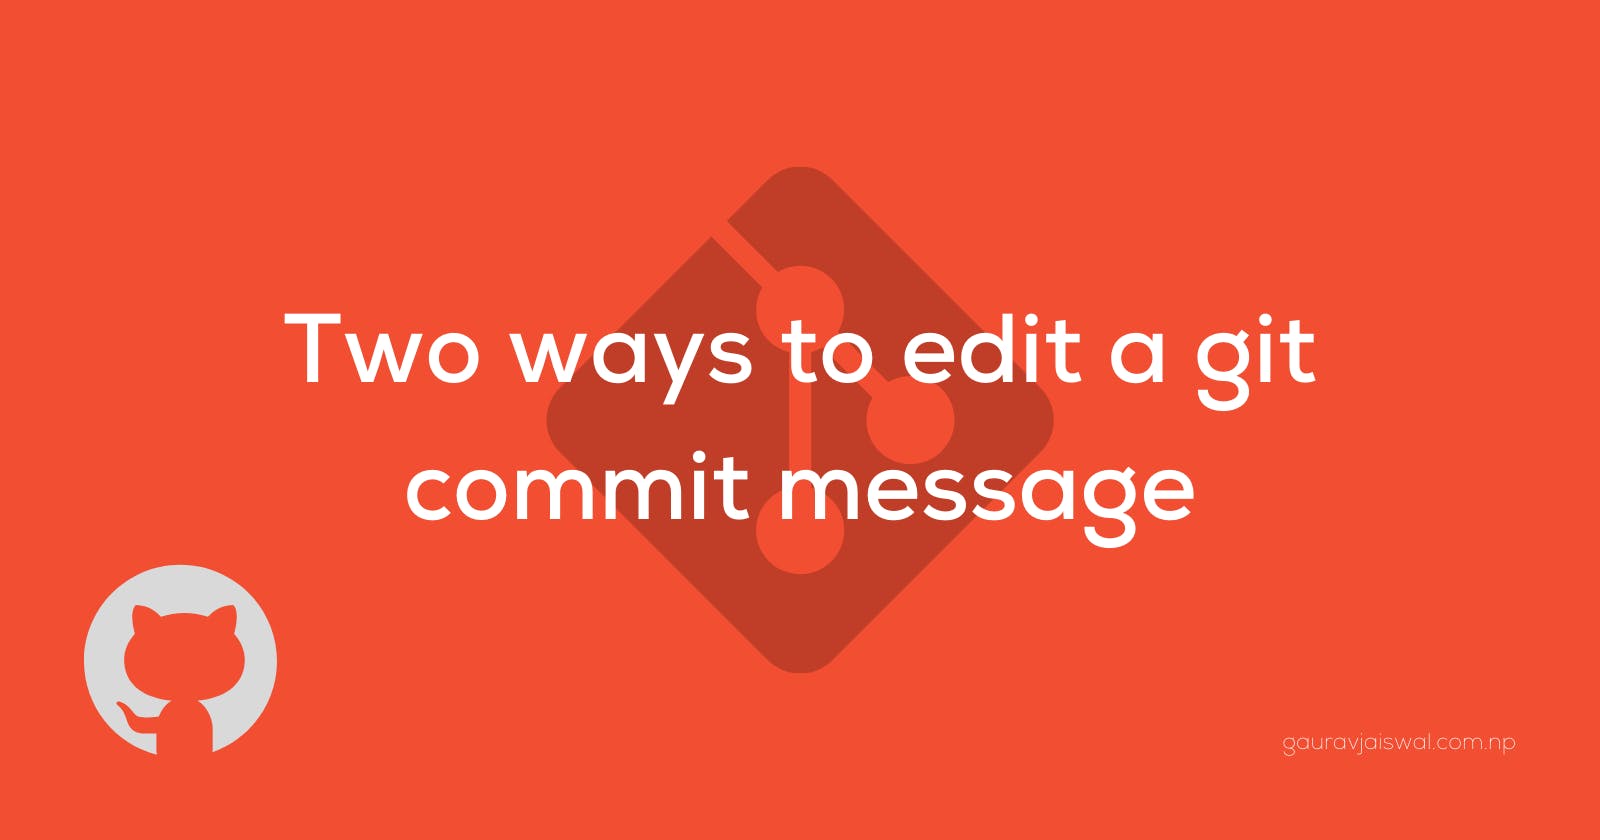 Learn to edit git commit message(s) after or before push